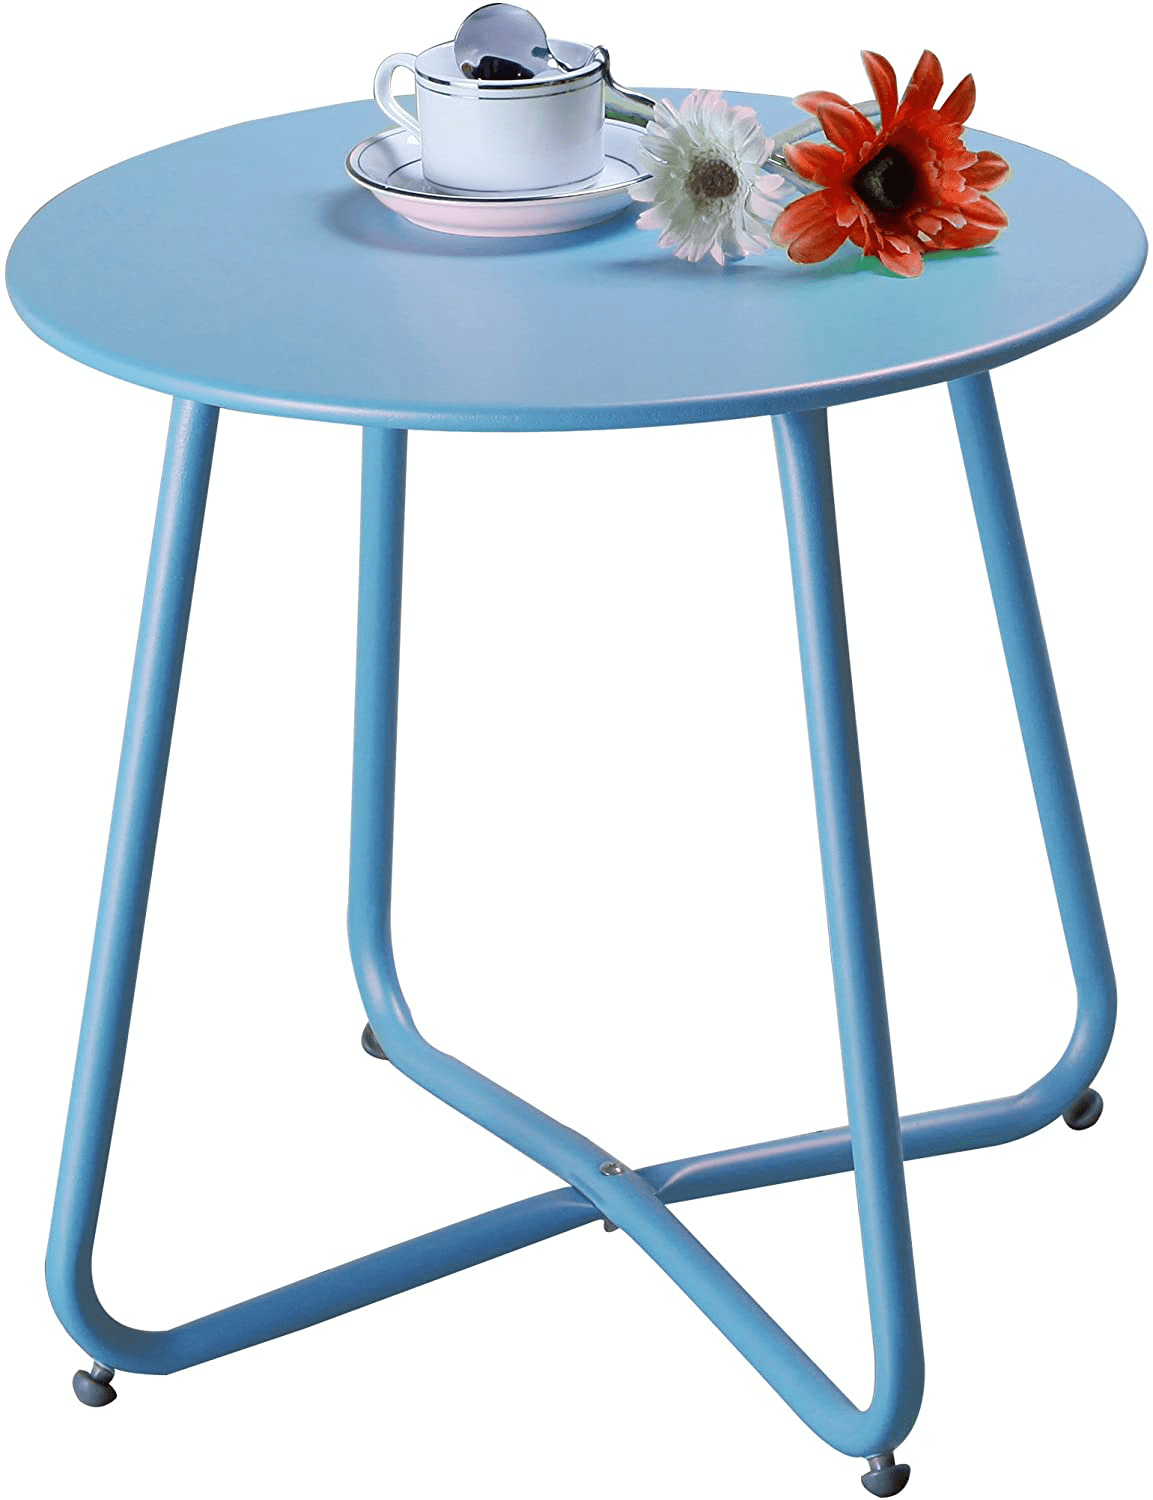 Weather Resistant Outdoor Side Table Grand Patio Steel Patio Coffee Table Tall Sized Round End Tables Mint Green